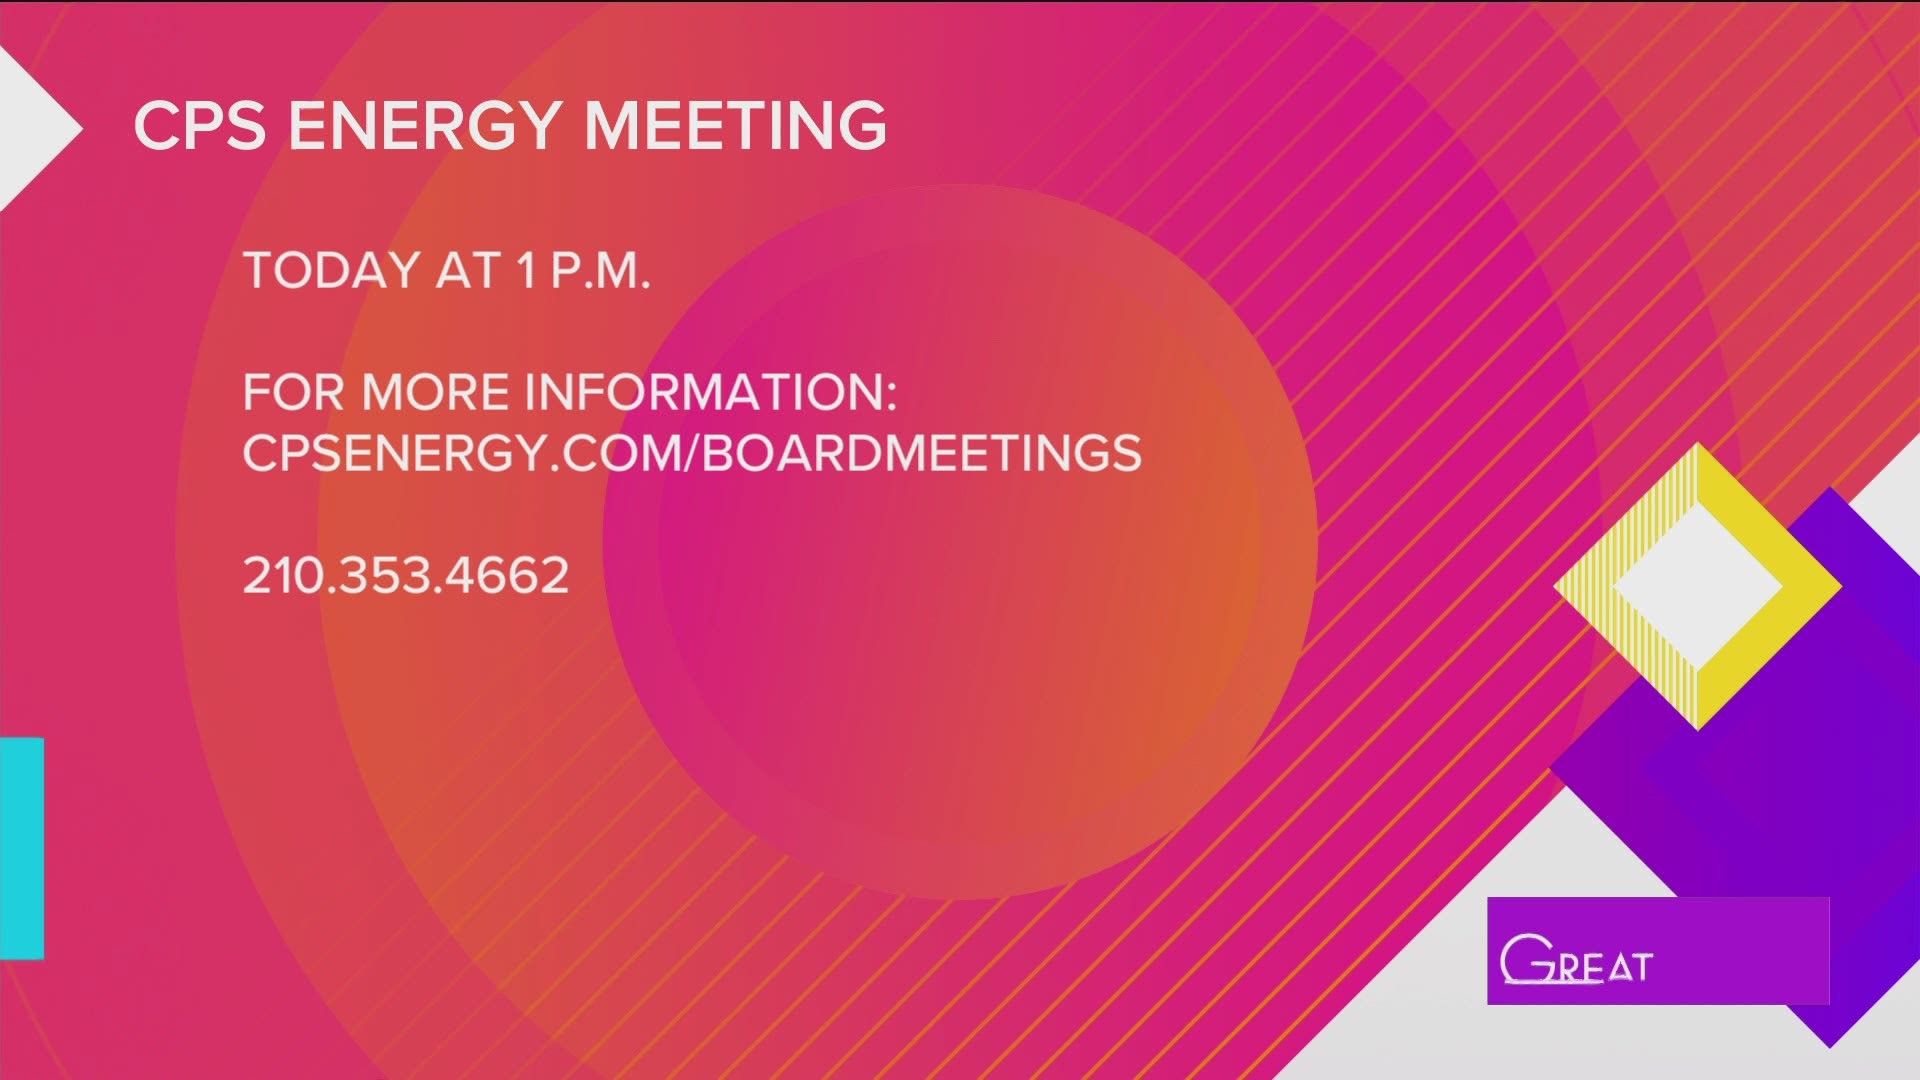 CPS Energy plans to hold an energy meeting at 1 p.m. today. They're asking the public to contact them with any concerns.